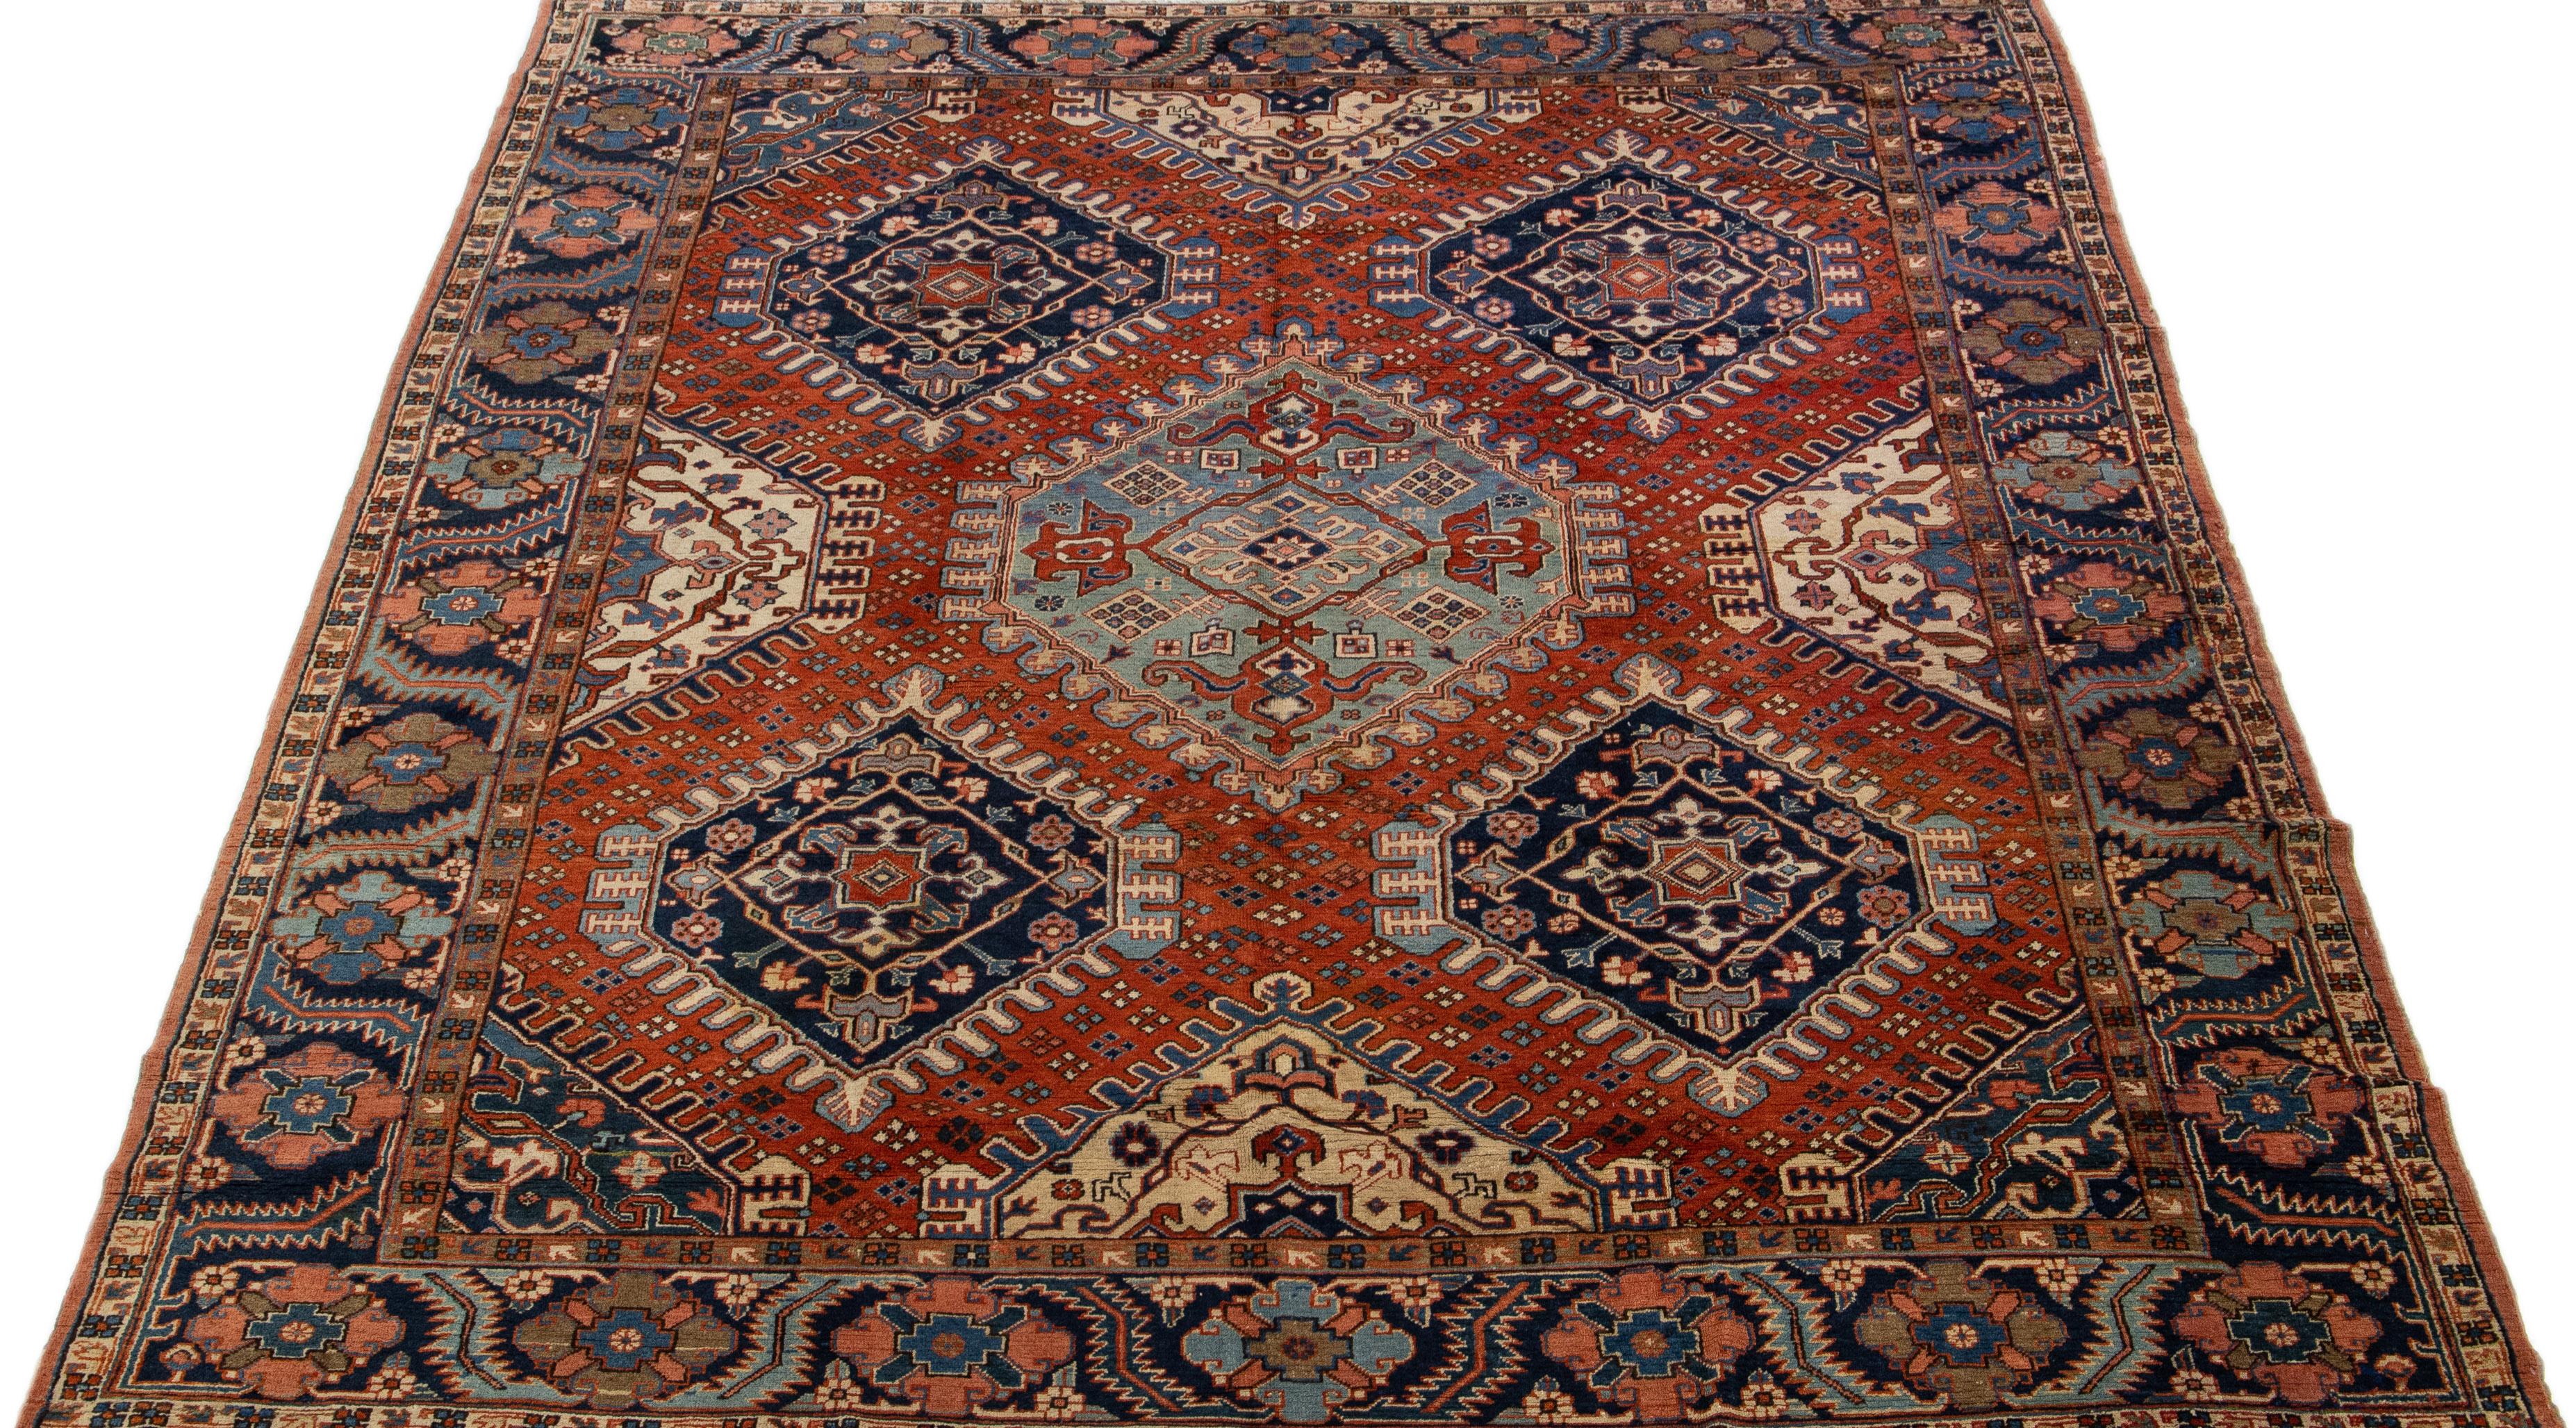 Beautiful antique Heriz hand-knotted wool rug with an orange rust color field. This Persian rug has a navy-blue designed frame and multicolor accents in a gorgeous geometric medallion design.

This rug measures: 10'3